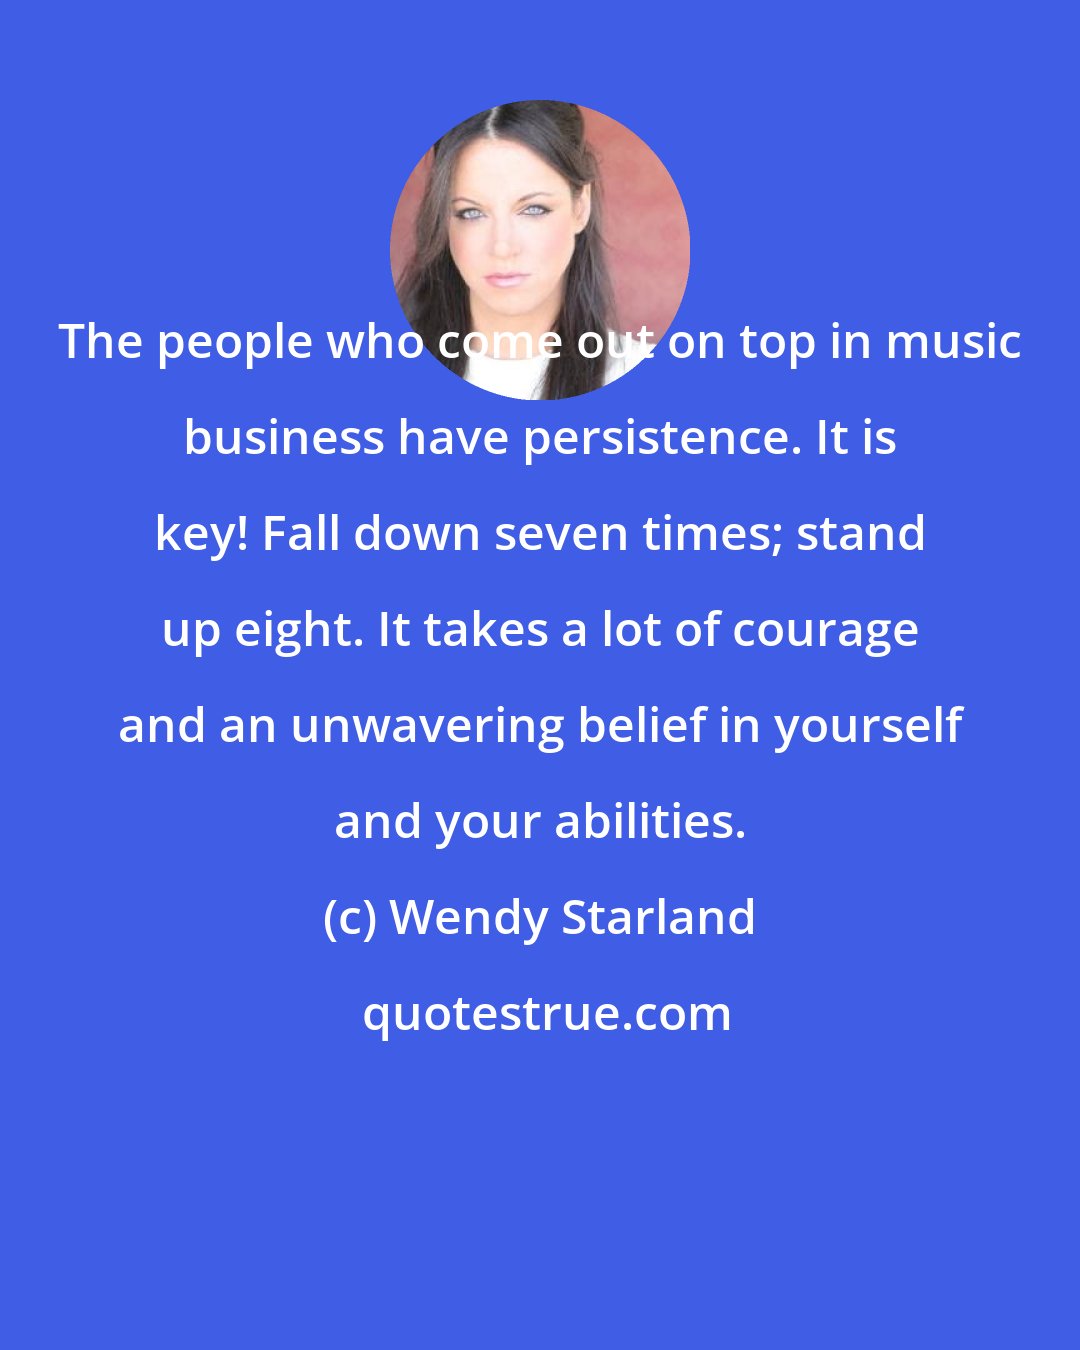 Wendy Starland: The people who come out on top in music business have persistence. It is key! Fall down seven times; stand up eight. It takes a lot of courage and an unwavering belief in yourself and your abilities.